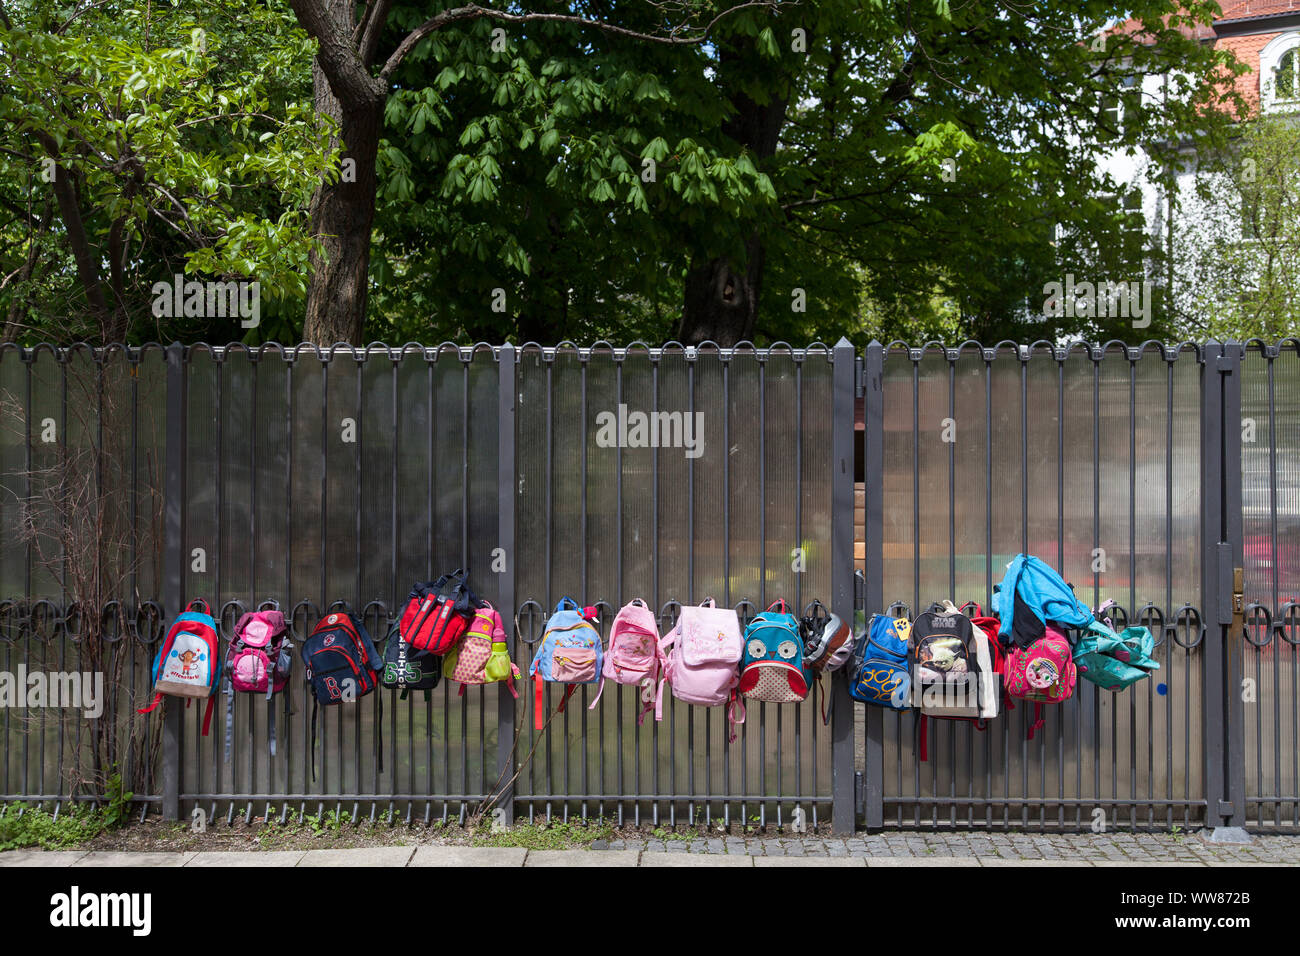 15 child backpacks at court gate Stock Photo